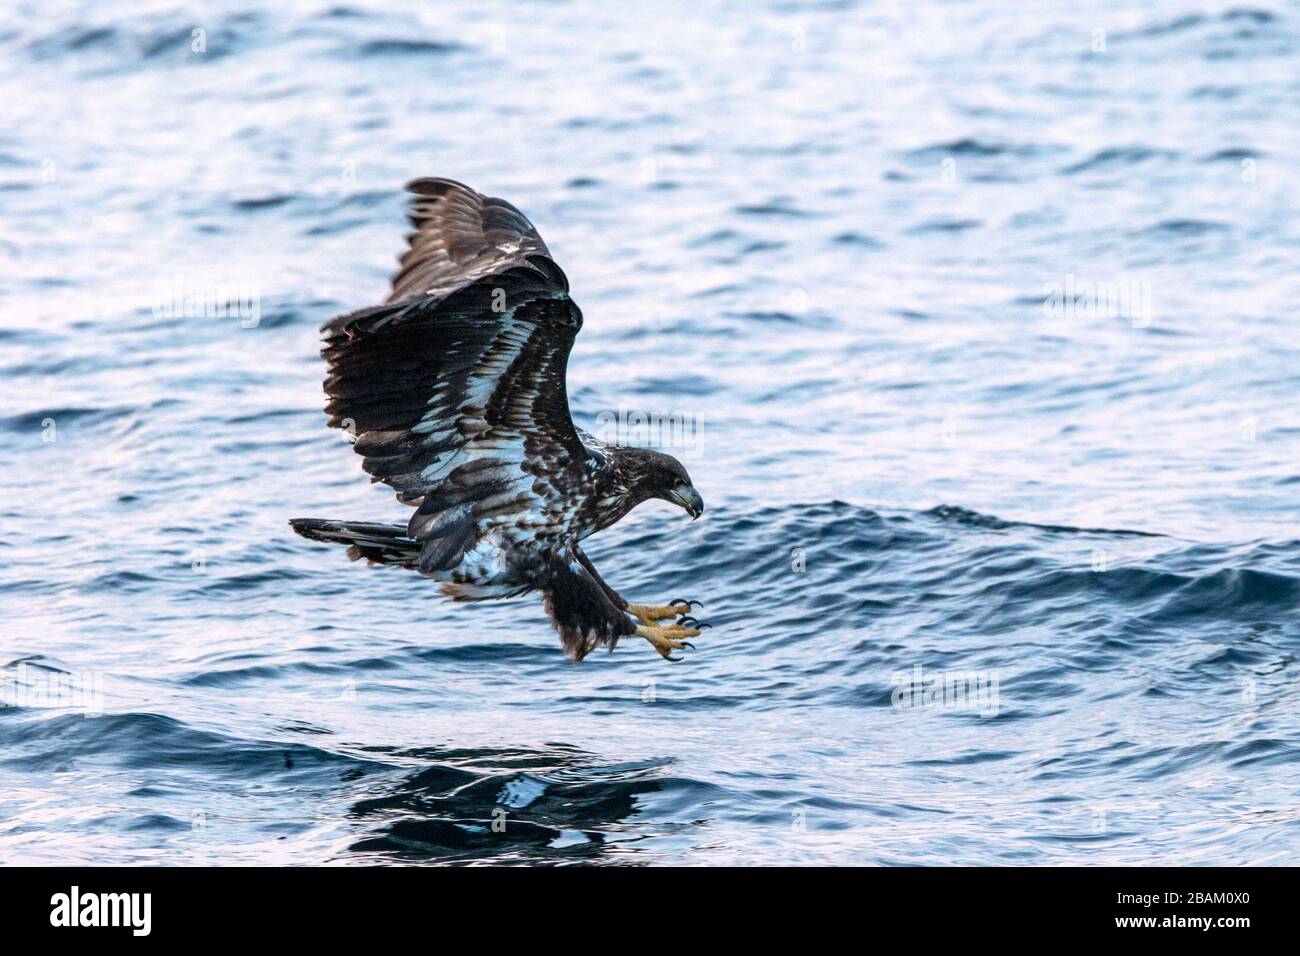 White-tailed eagle in flight hunting fish from sea,Hokkaido, Japan, Haliaeetus albicilla, majestic sea eagle with big claws aiming to catch fish from Stock Photo